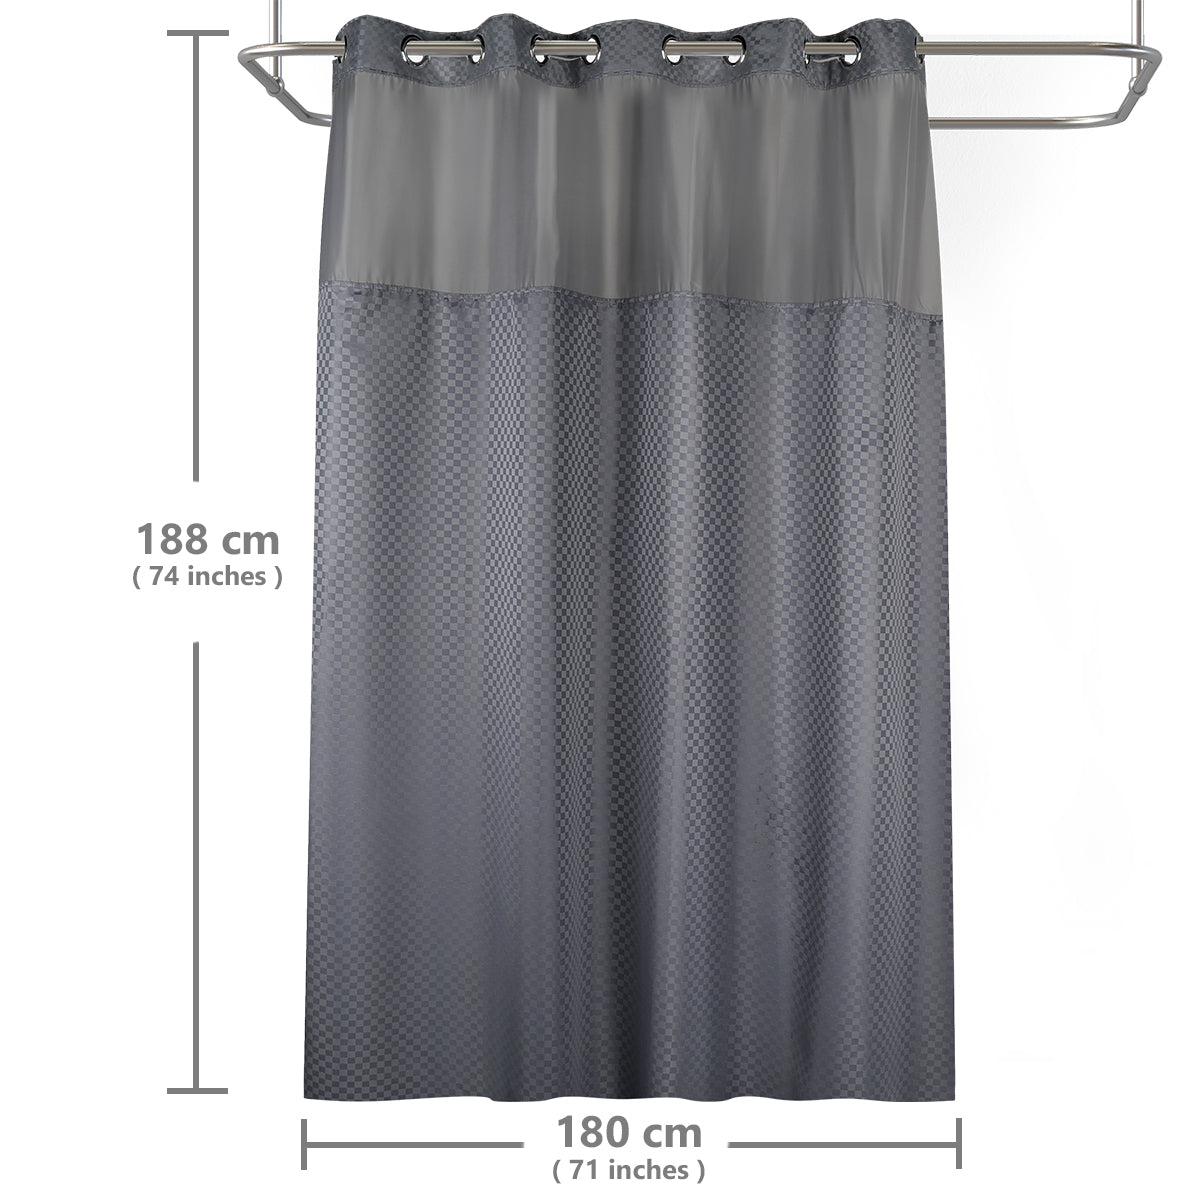 Lagute-Hookless-Shower-Curtain-Grey-Color-7